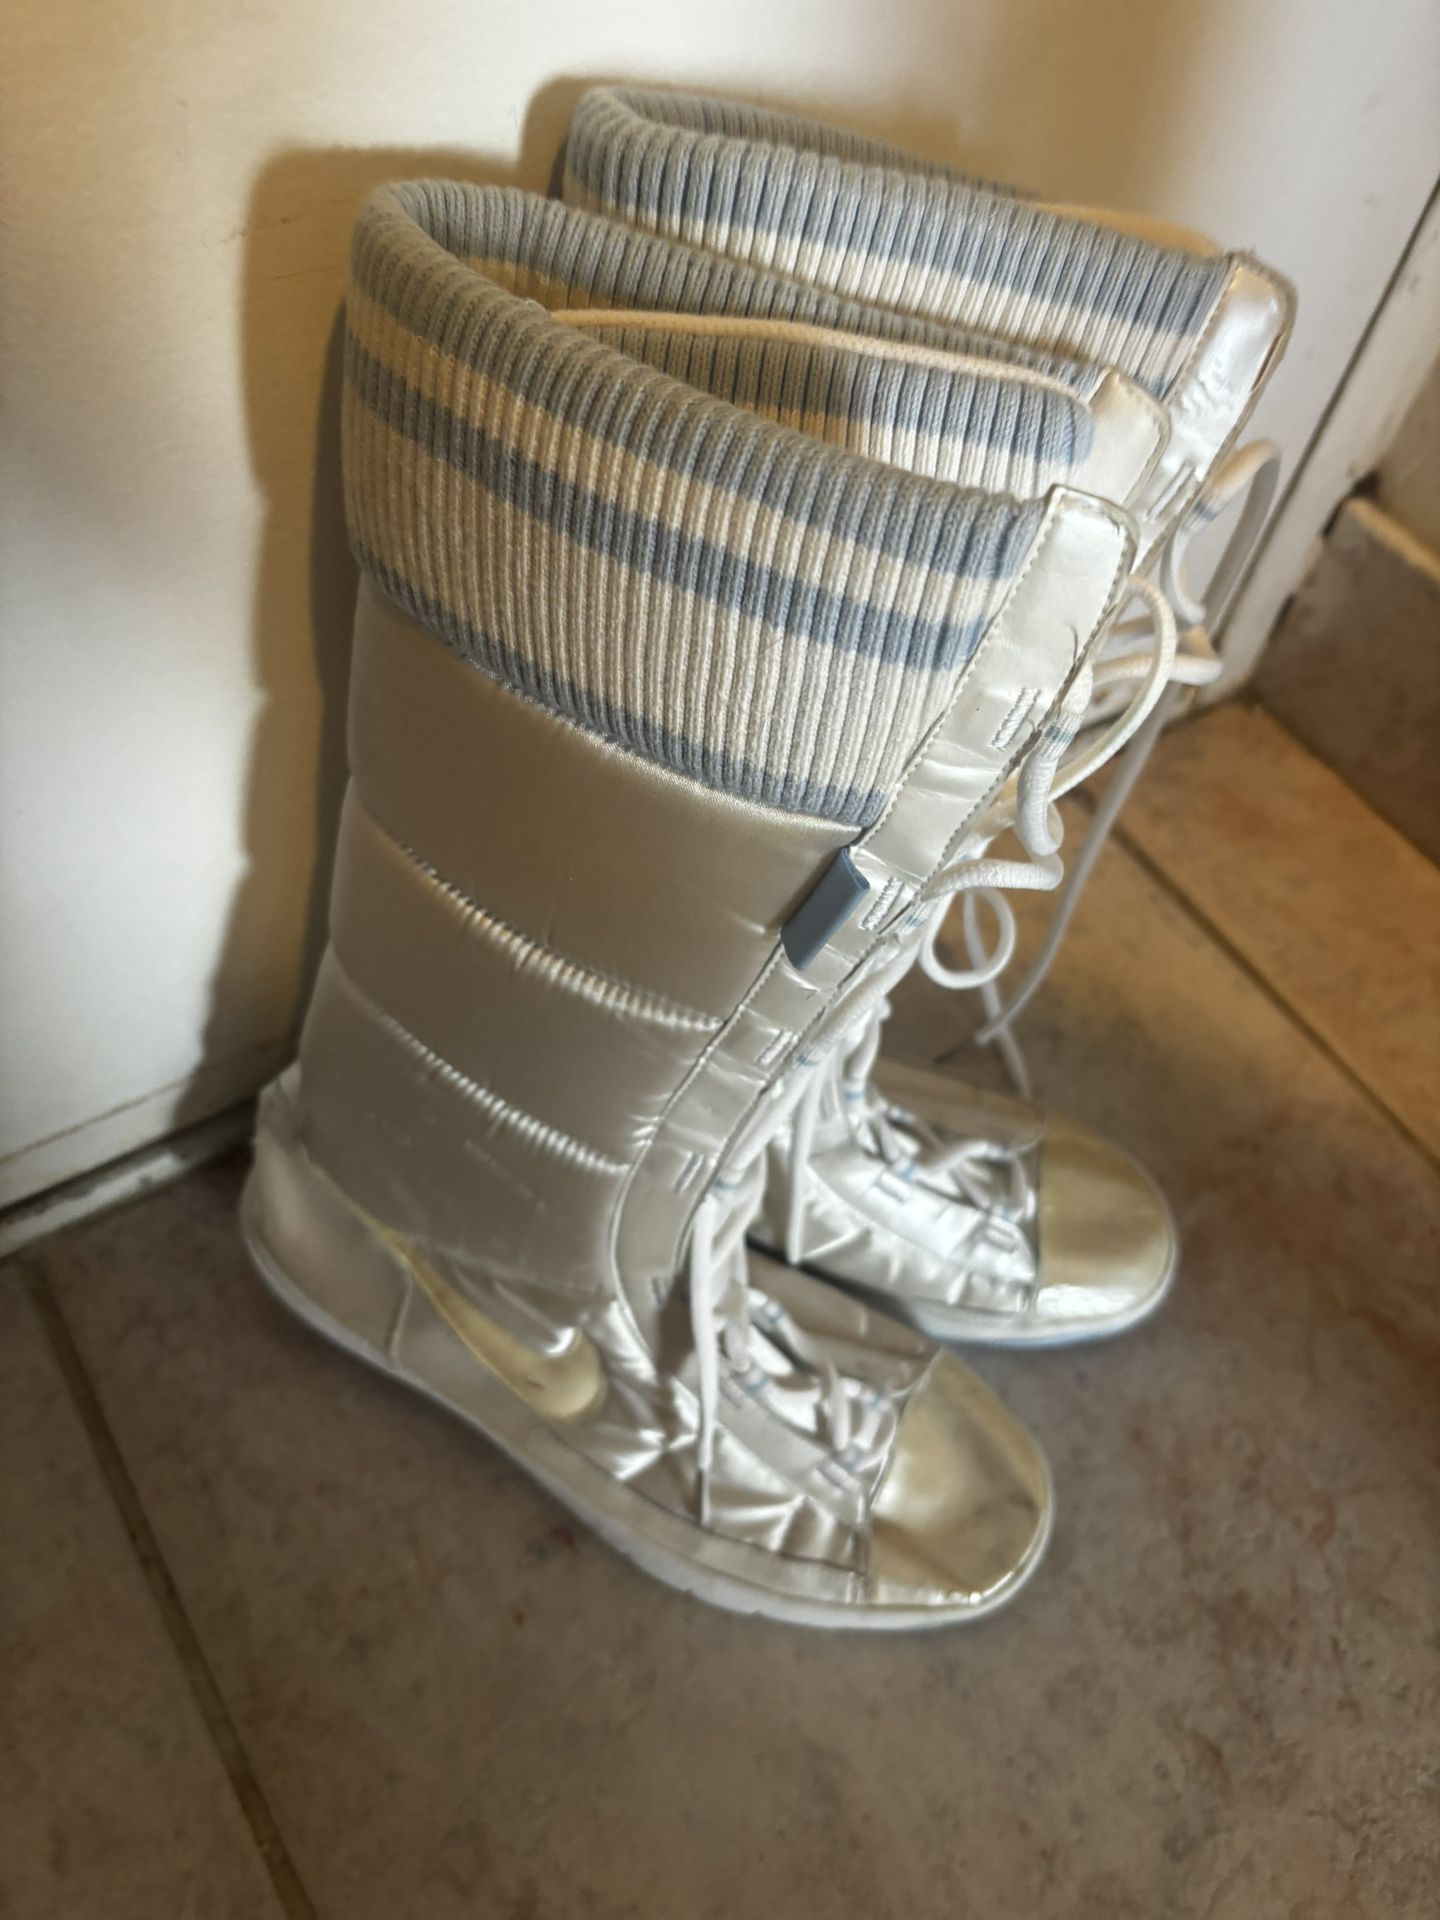 Nike 2007 Satin RARE sneakers Winter ski Knee High Snow Boot (contact info removed)11 shoes y2k